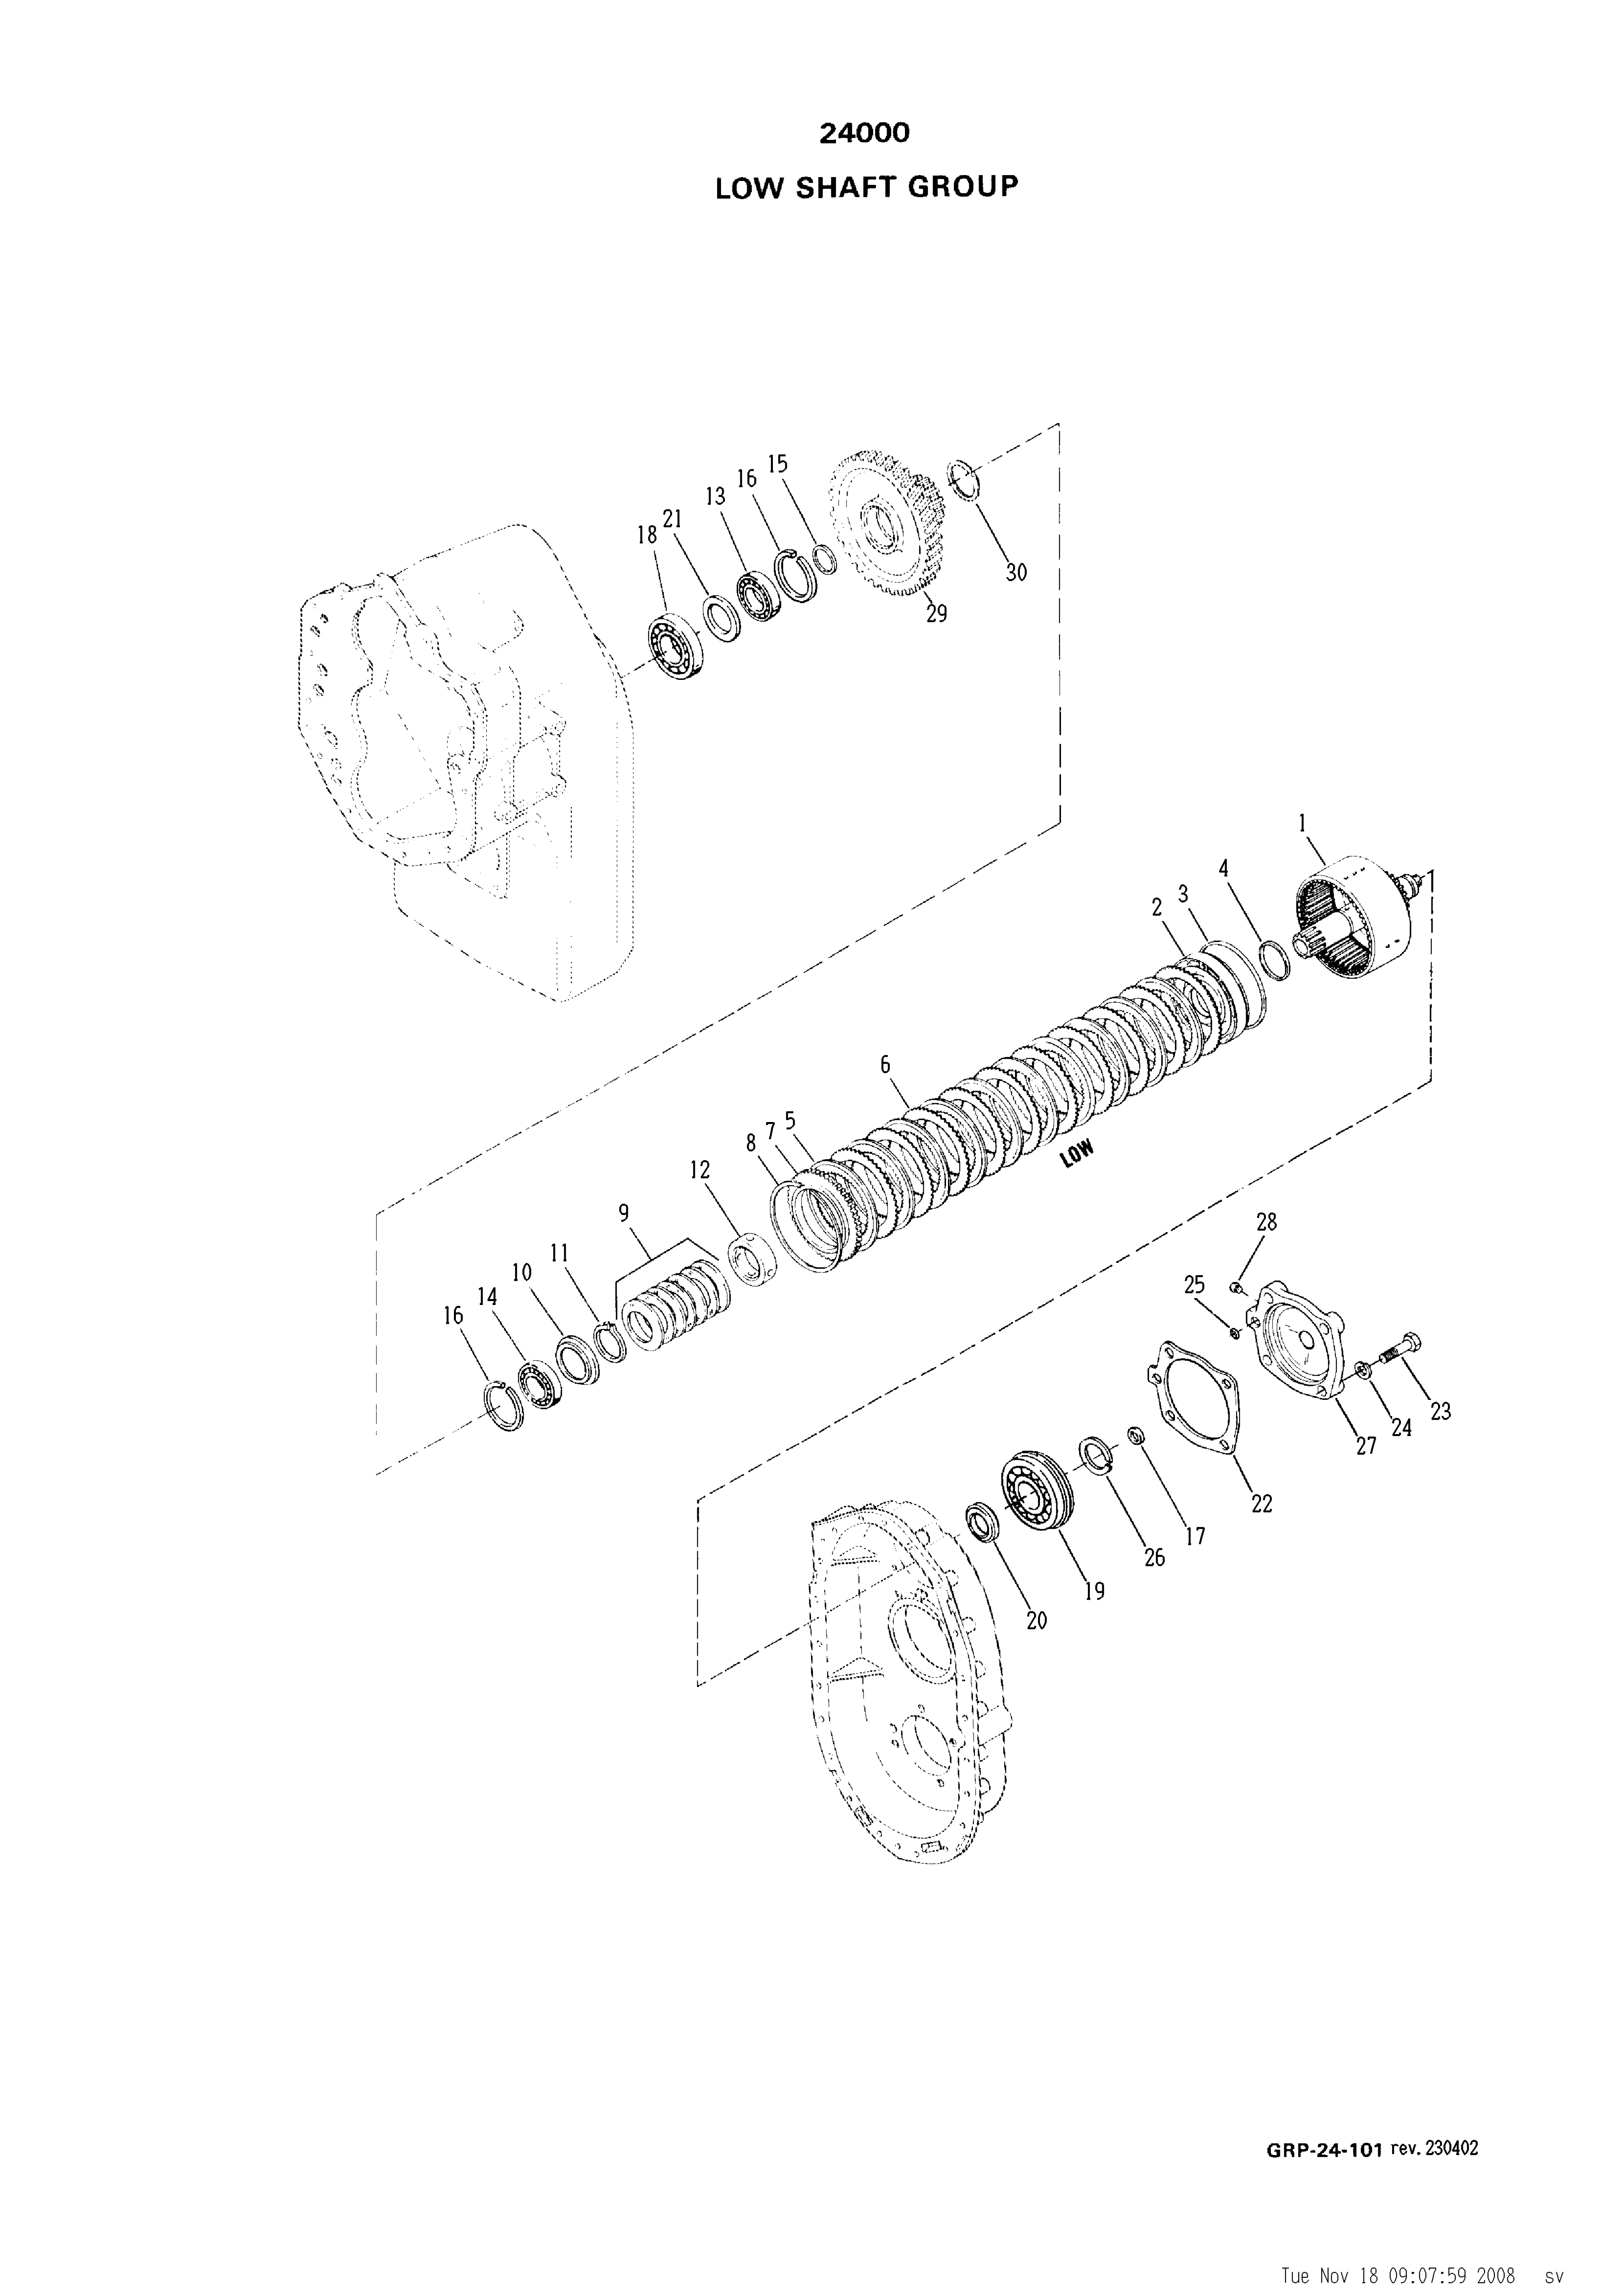 drawing for TAMROCK 4699659 - DISC (figure 2)